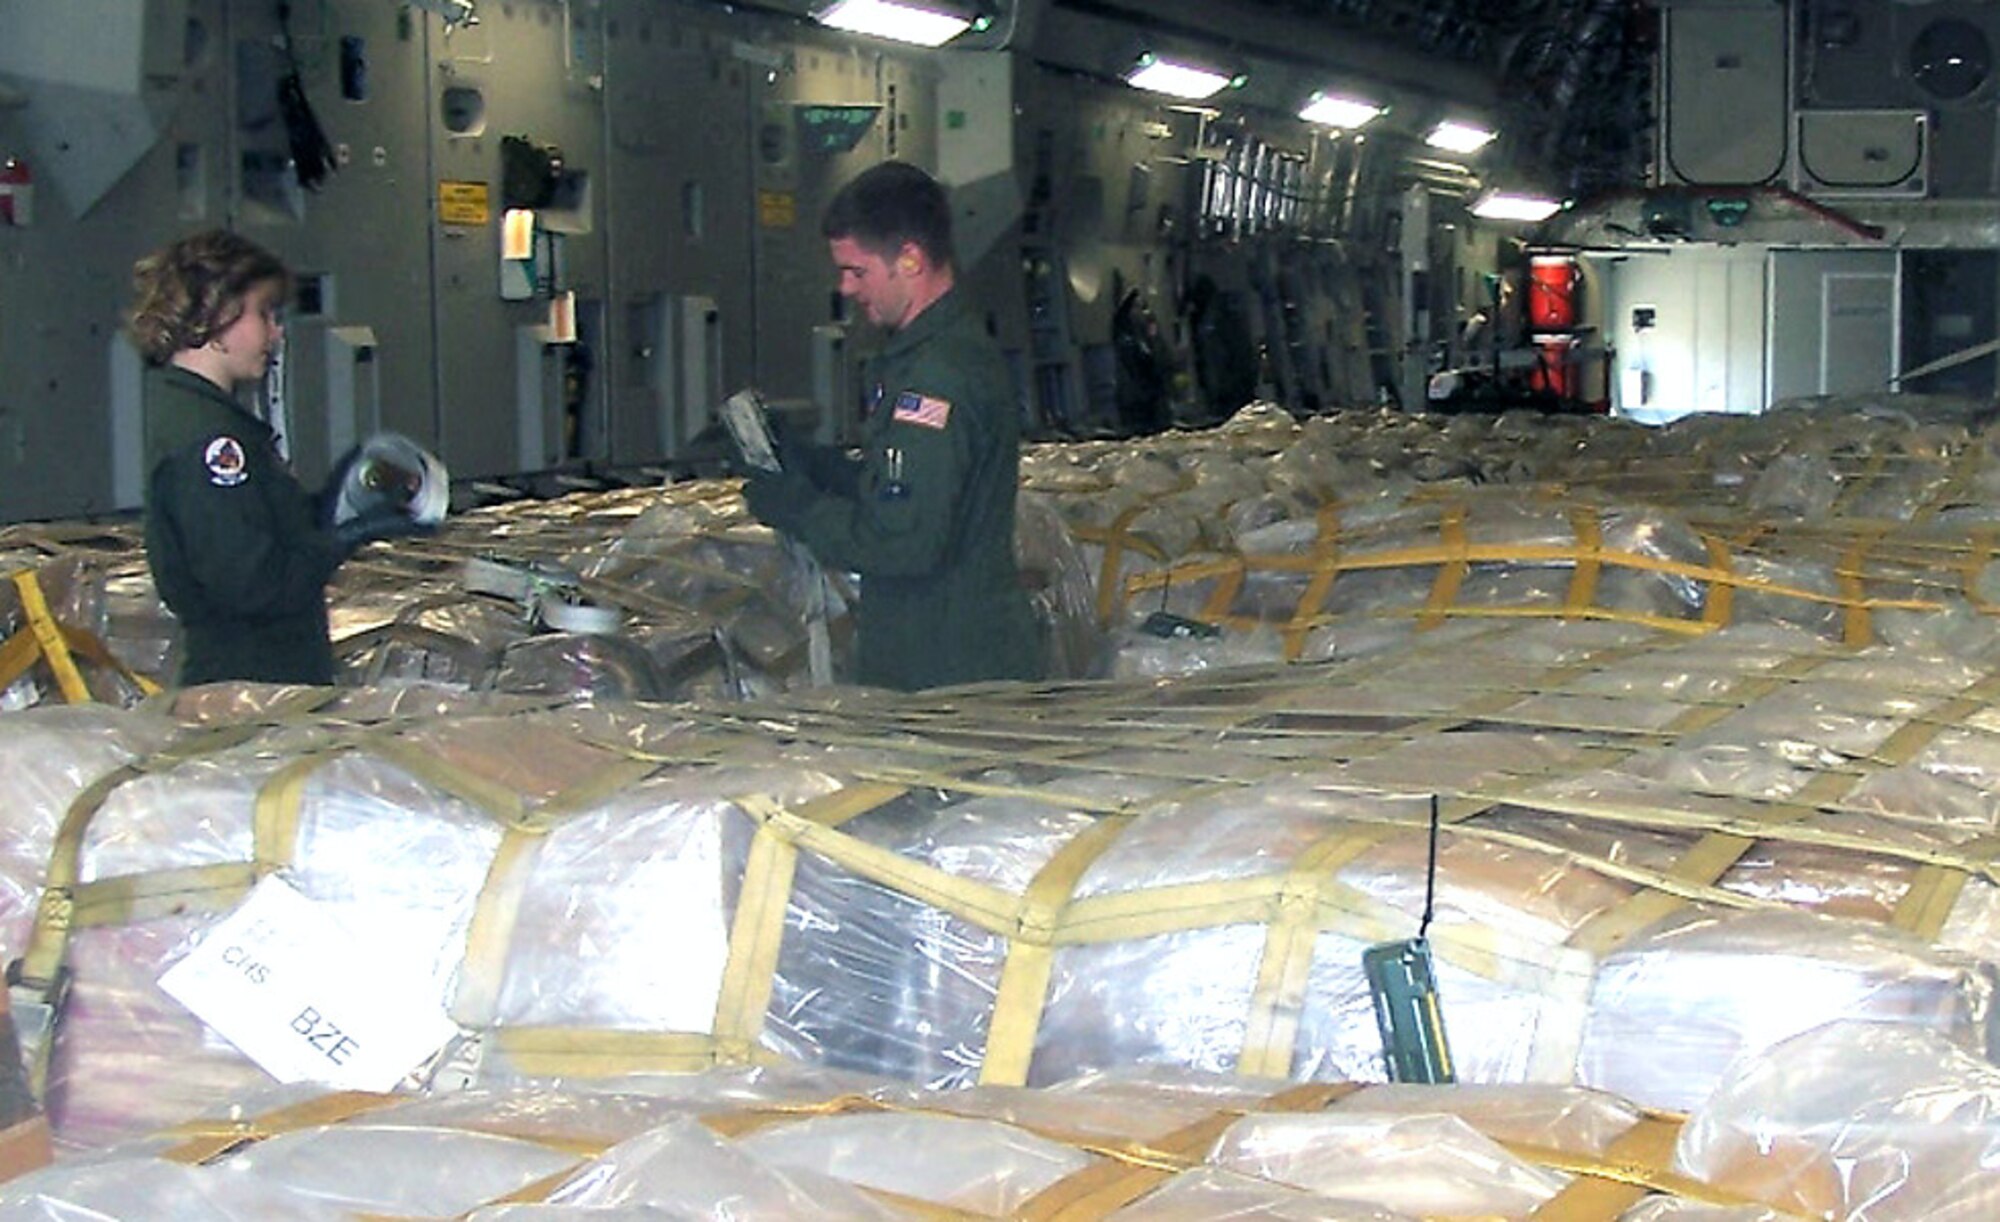 Loadmasters with the Air Force Reserve Command's 701st Airlift Squadron at Charleston Air Force Base, S.C., prepare to unload humanitarian cargo destined for children in Belize. The Denton Amendment allows the U.S. military to transport, on a space-available basis, humanitarian supplies from non-governmental organizations to people around the world who are in need. (U.S. Air Force photo/Maj. Derek Bishop)